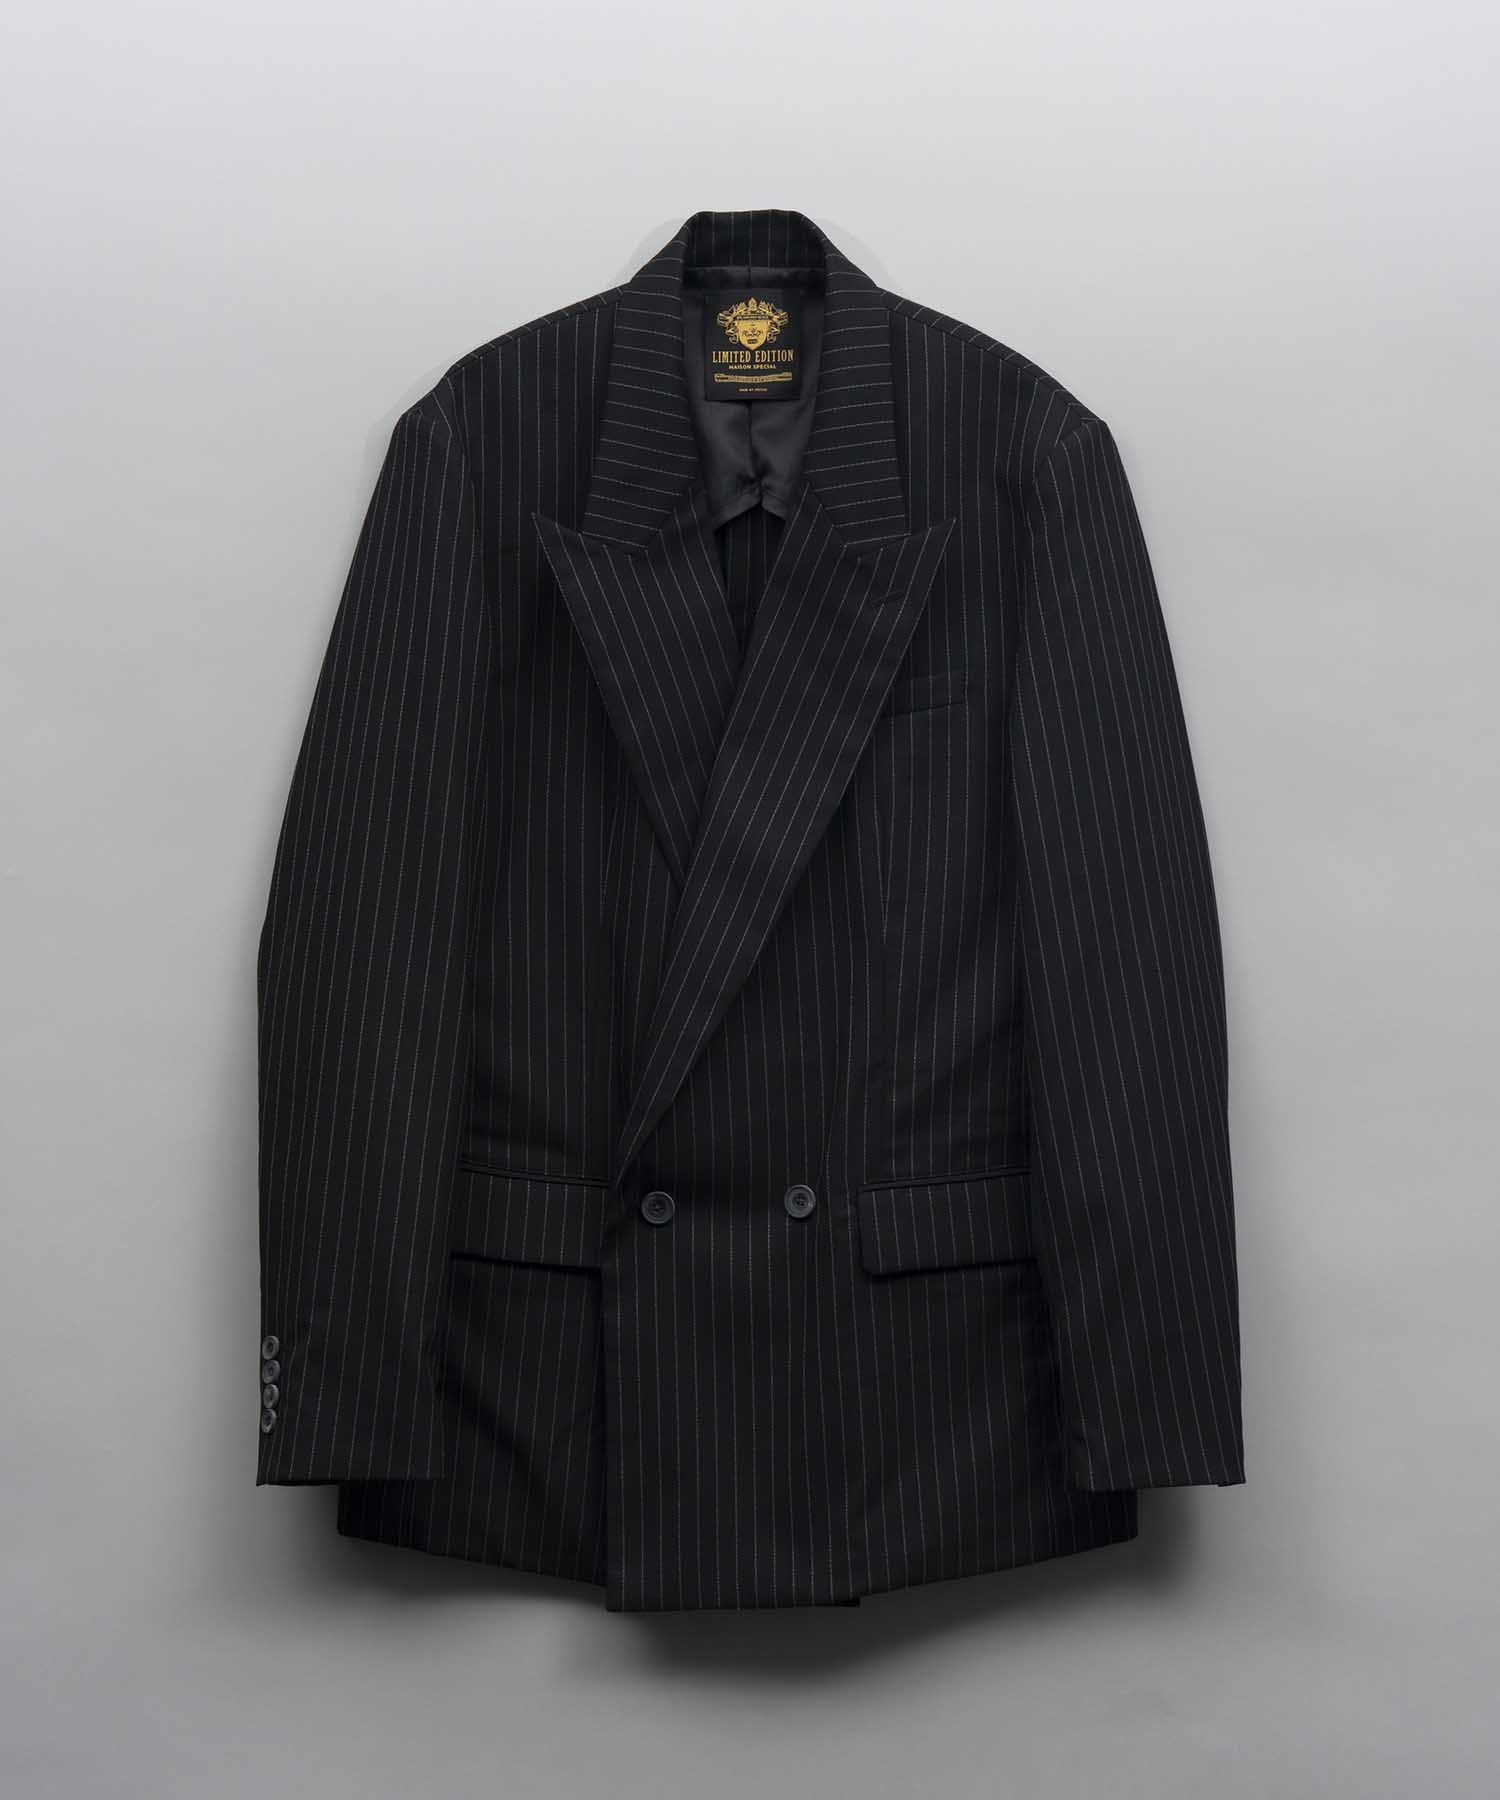 [Limited Edition] Dress-Fit Peaked Lapel Double Double Breasted Tailored Jacket